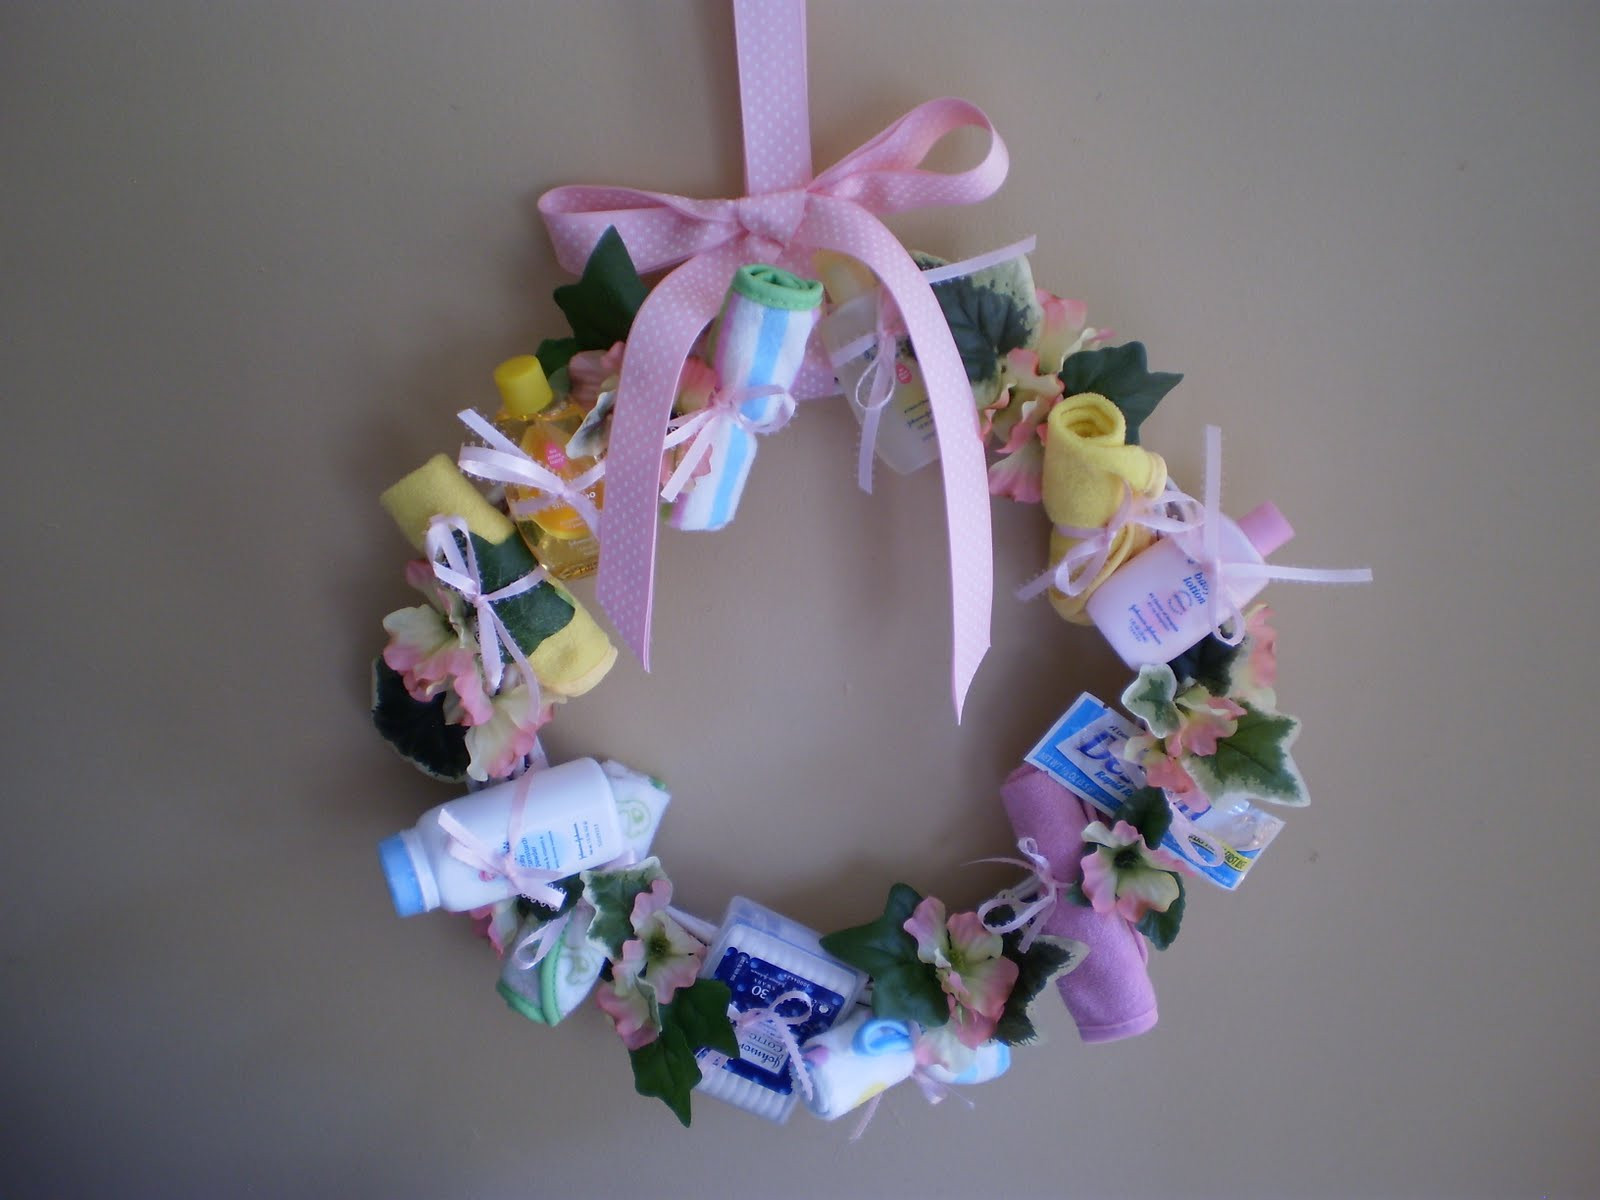 Baby Girl Gifts For Baby Shower
 e Simple Country Girl A Neat Baby Shower Gift Idea